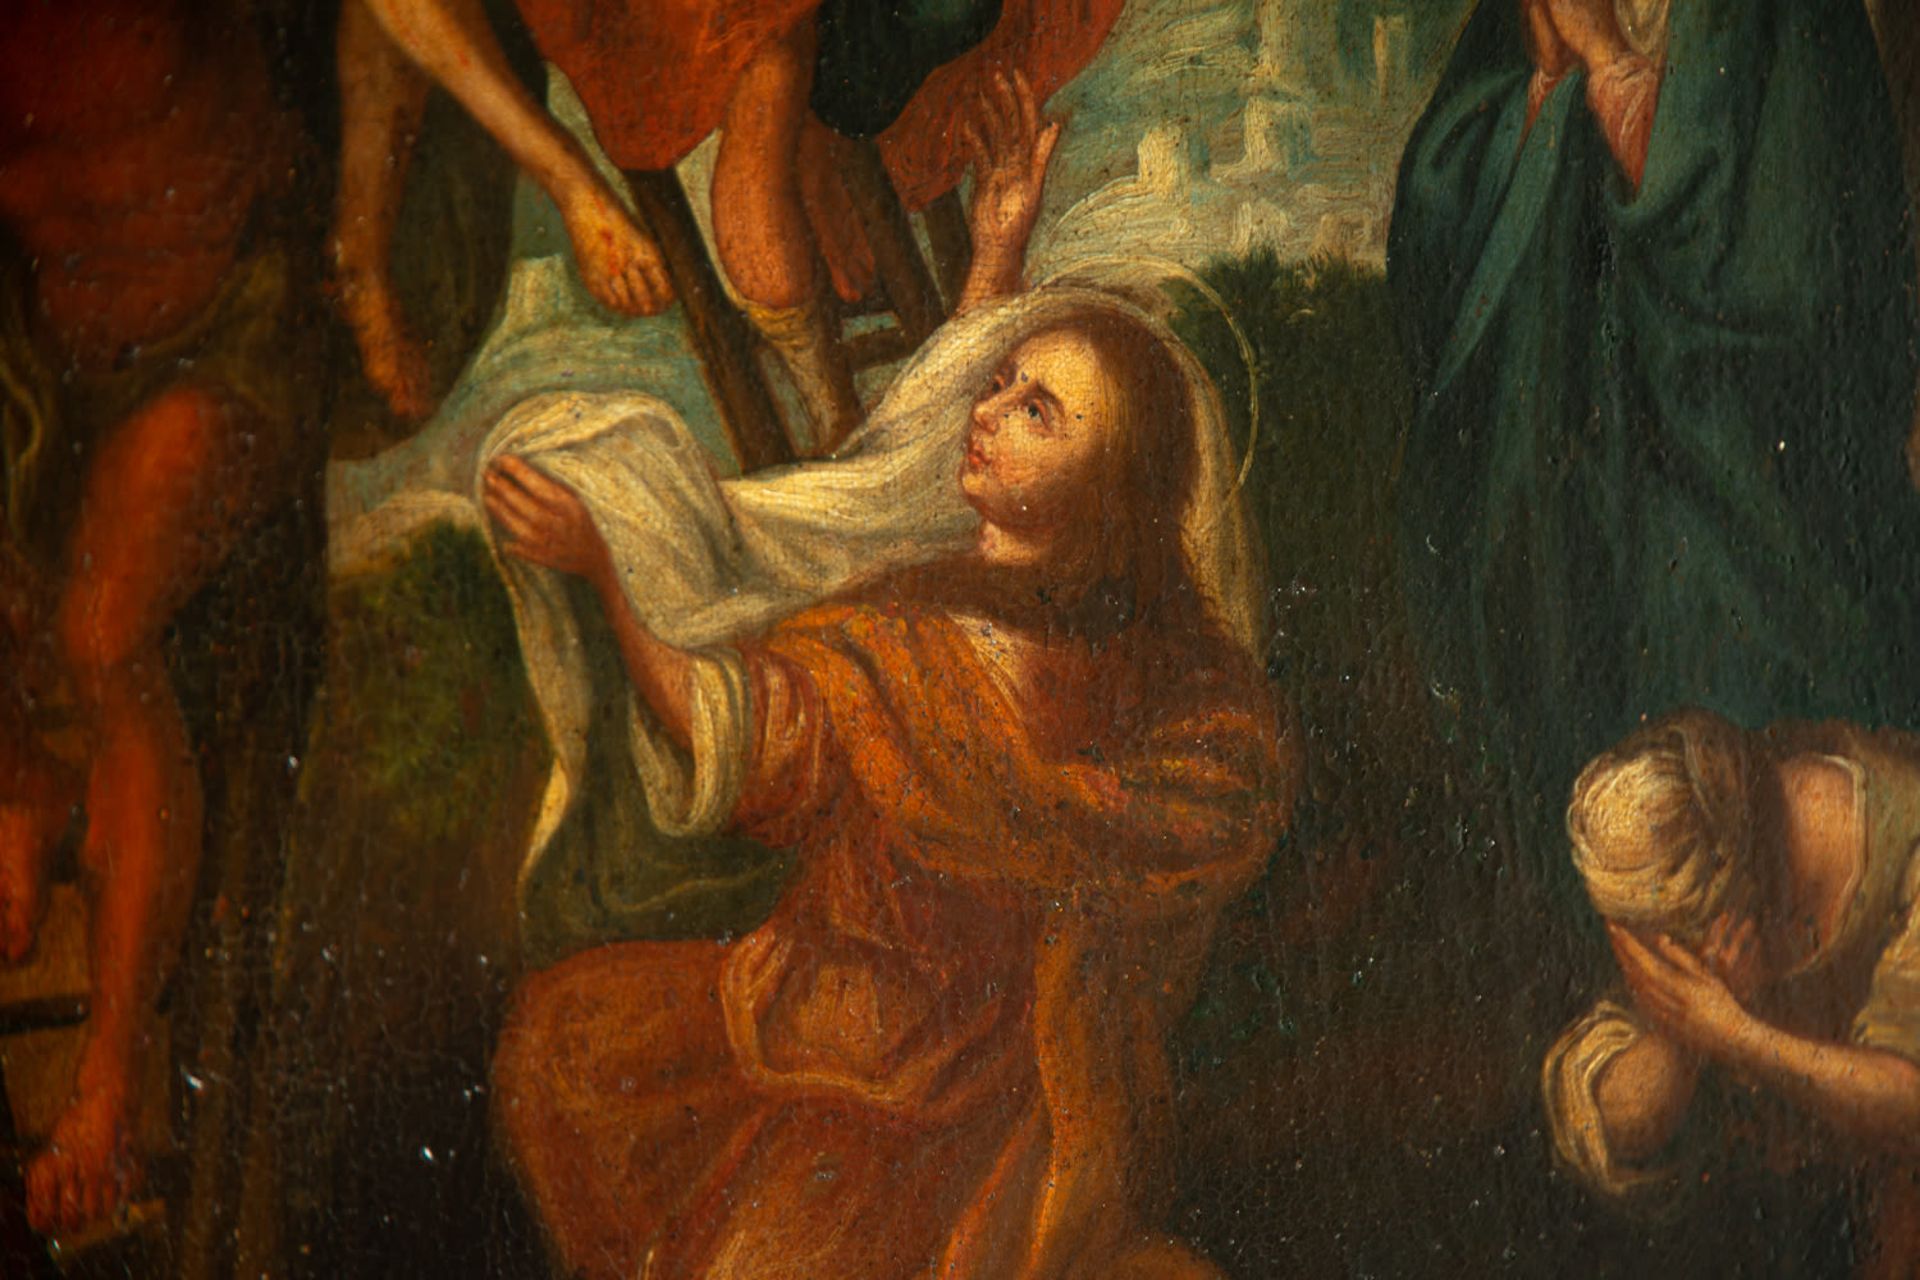 Jesus Descending from the Cross, Spanish school of the 17th century - Image 10 of 11